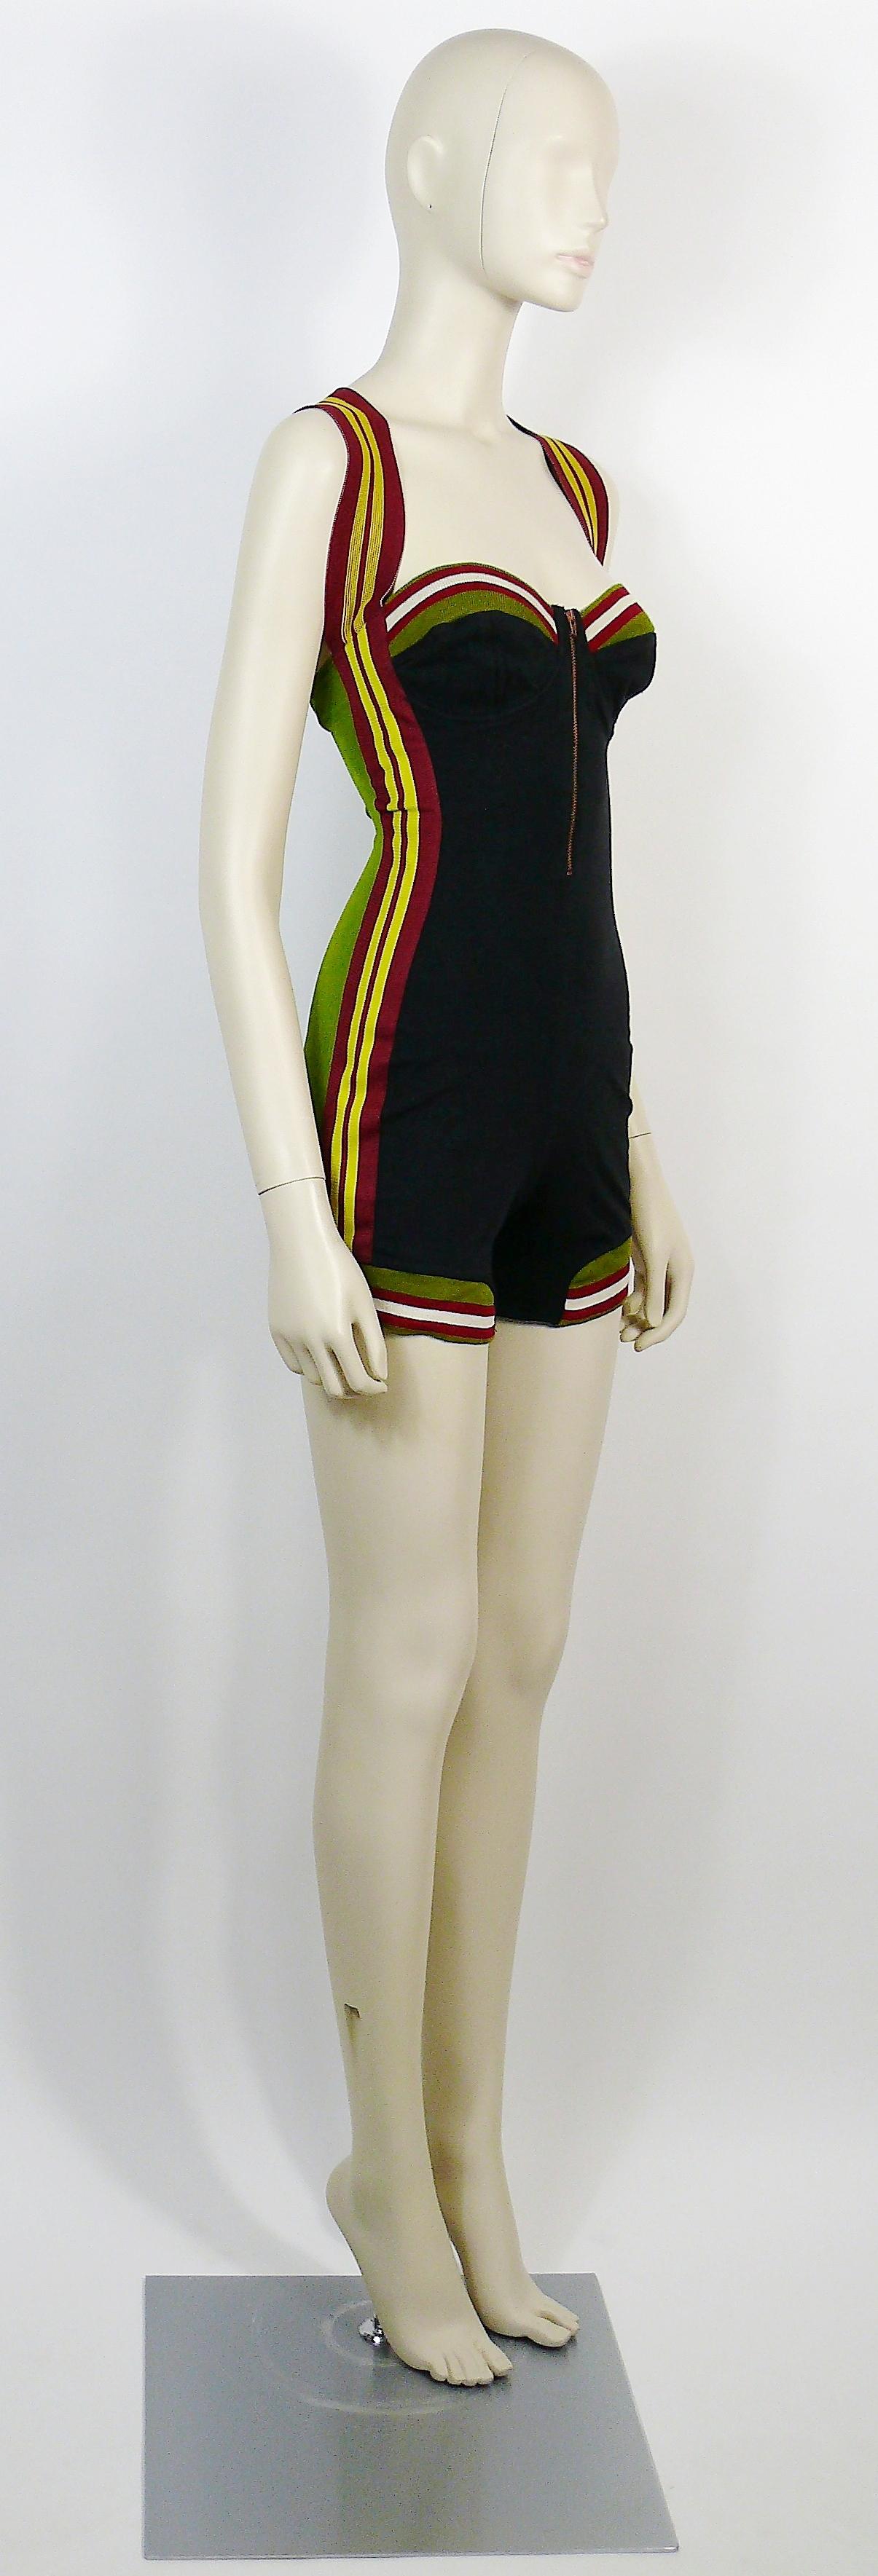 JEAN PAUL GAULTIER vintage rare 1990s black and green bustier shortall.

This shortall features :
- Black front and green back with multicolored knitted striped details.
- Boned bustier.
- Crisscross elasticated straps.
- Copper toned zipper at